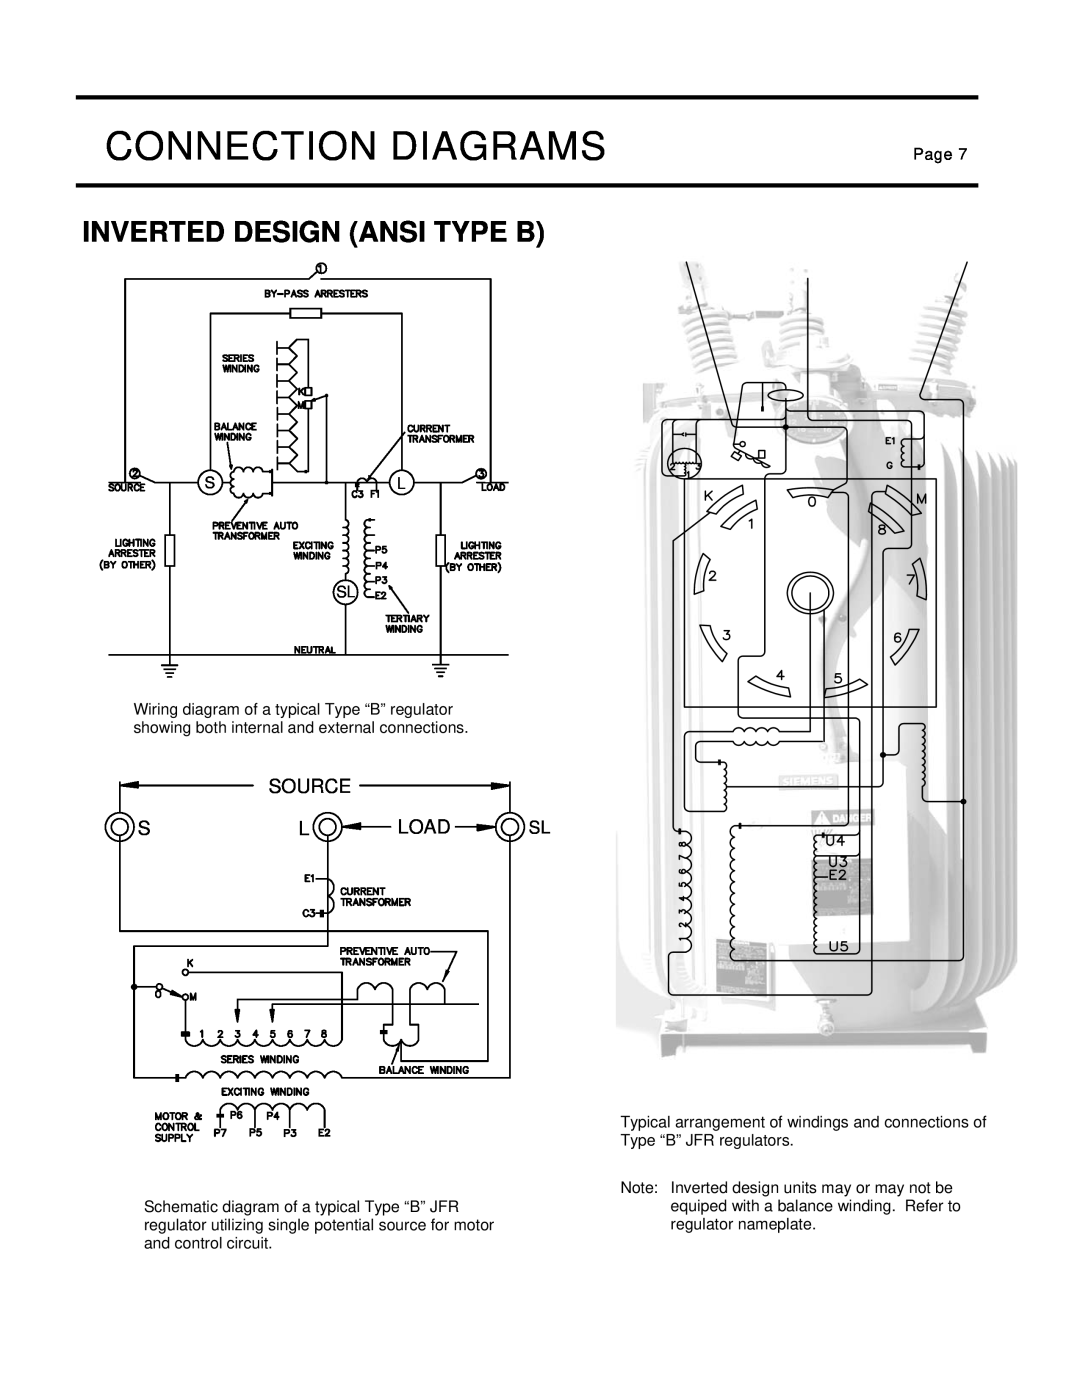 Siemens 21-115532-001 manual Inverted Design Ansi Type B, Connection Diagrams, Source, Load 